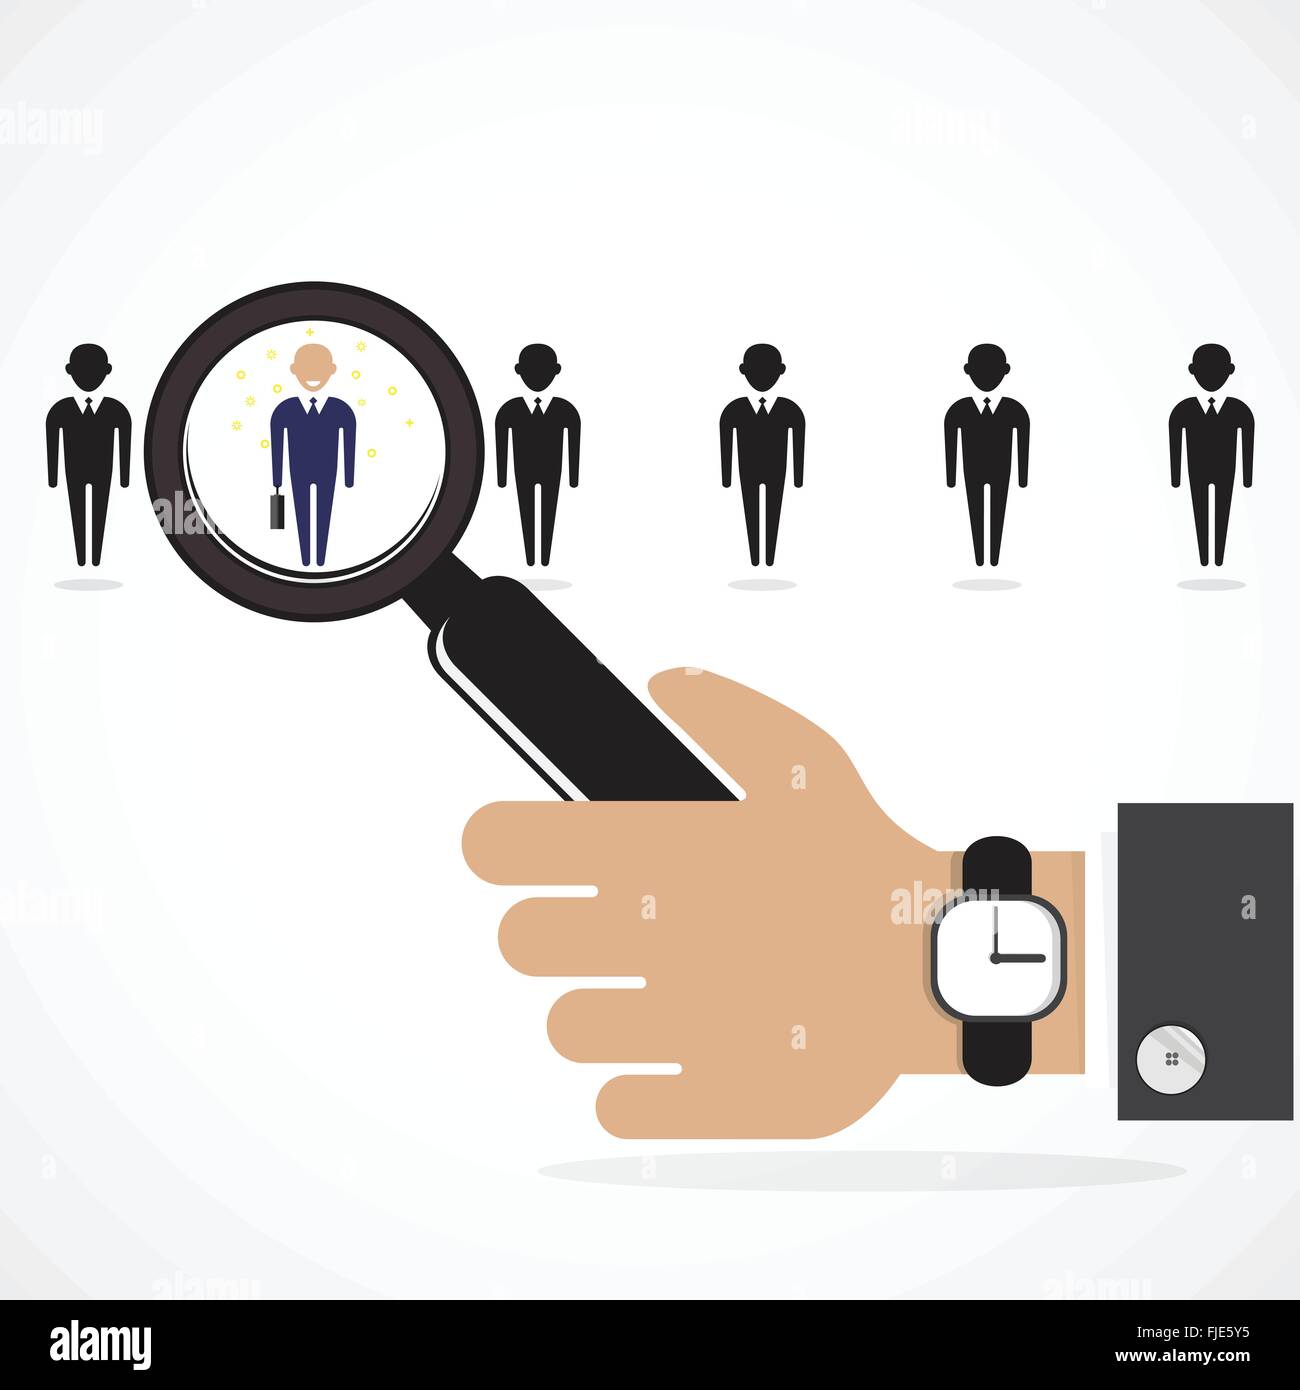 Search for an employee. Looking For Talent. Search for businessman. Businessman standing out from the crowd. Business idea Stock Vector